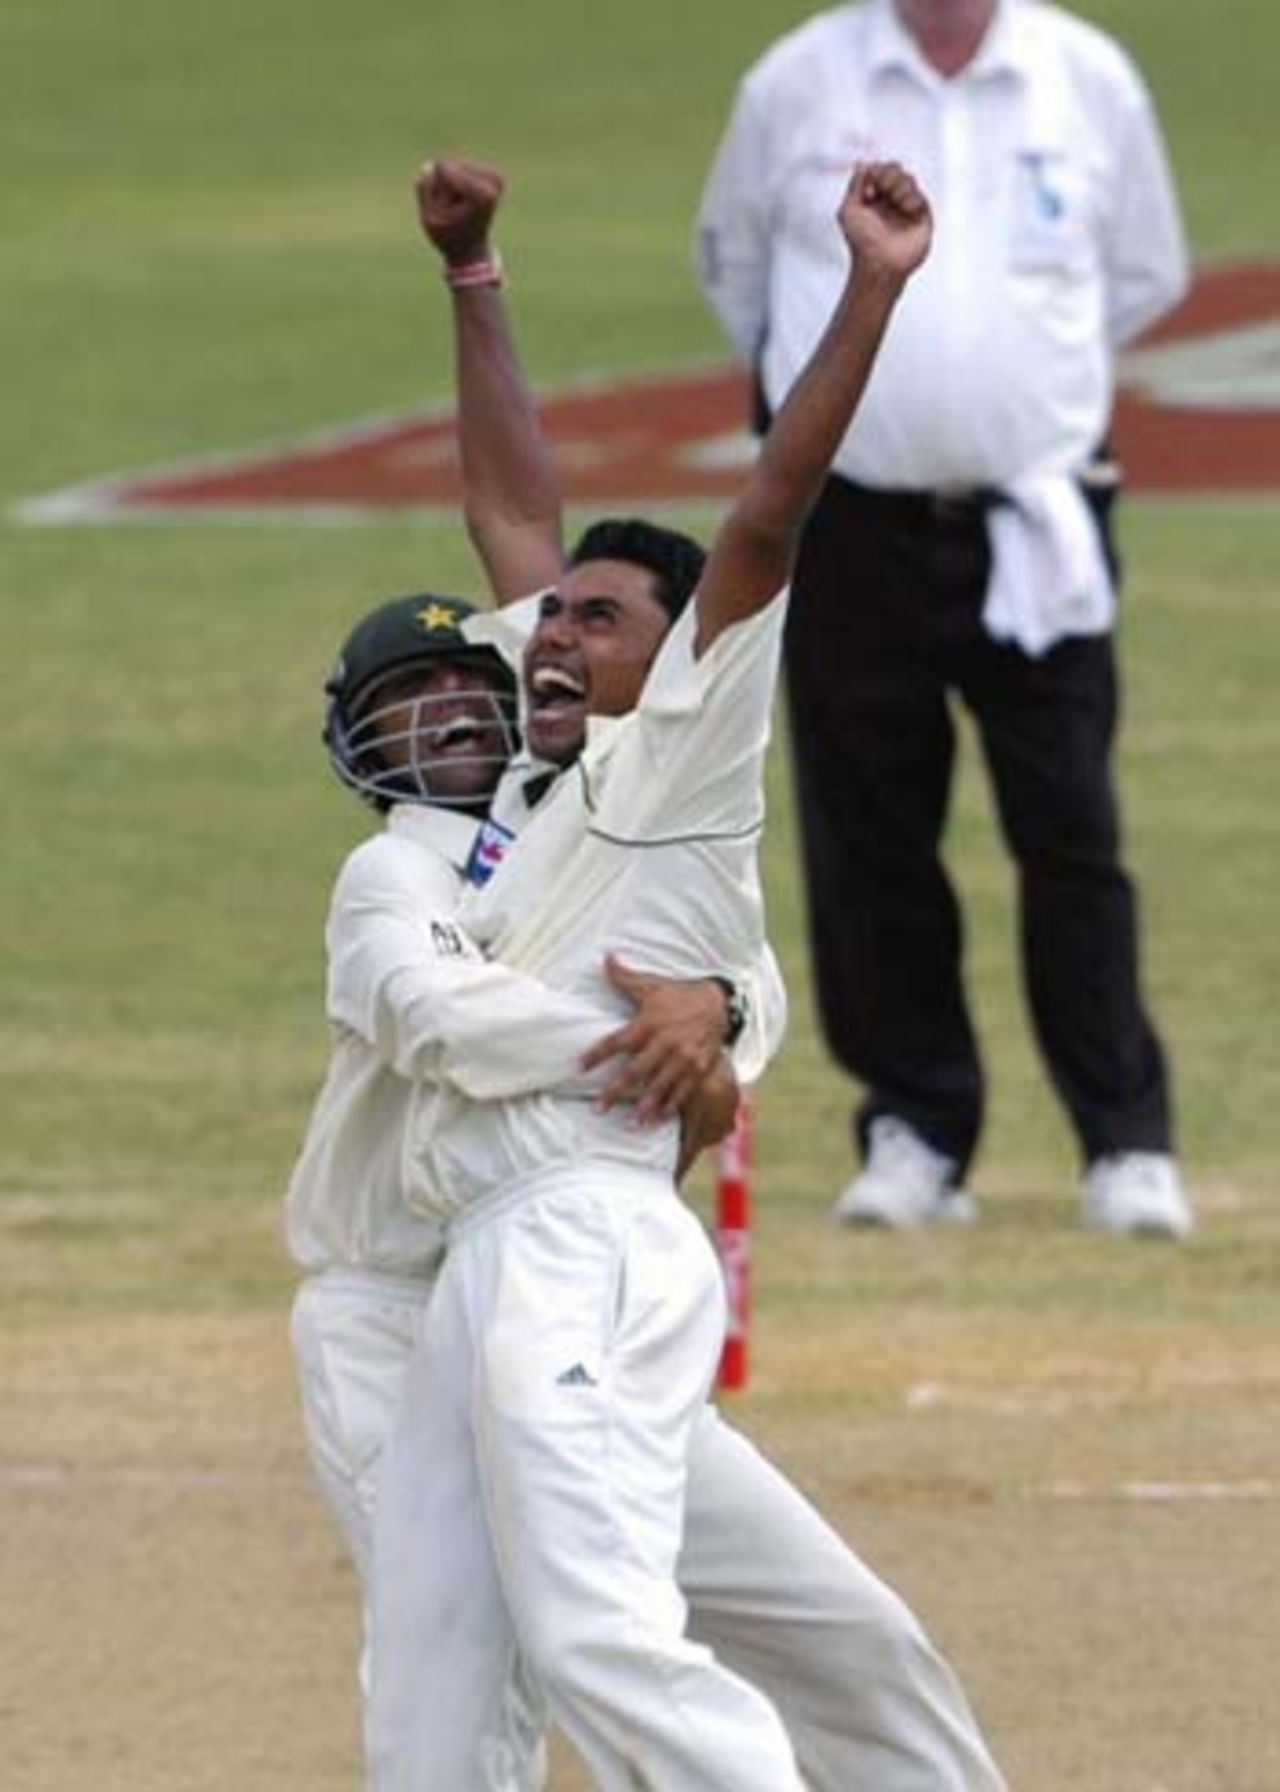 Danish Kaneria celebrates getting back into the groove with a wicket, West Indies v Pakistan, 2nd Test, Jamaica, June 6, 2005